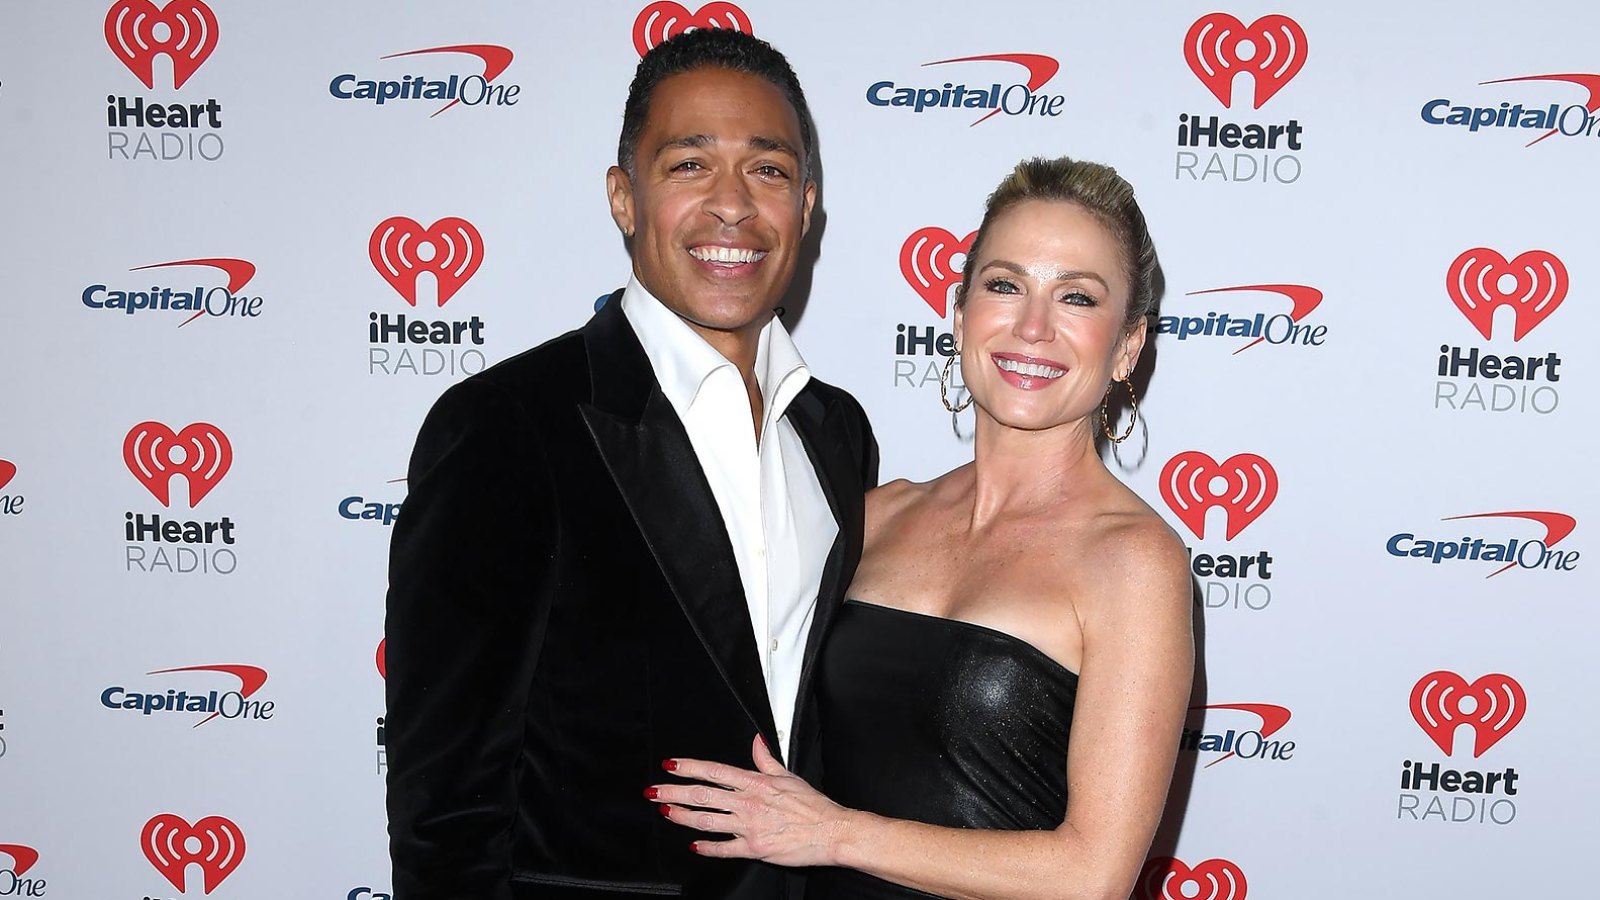 TJ Holmes Reveals When He Realized His Feelings for Girlfriend Amy Robach